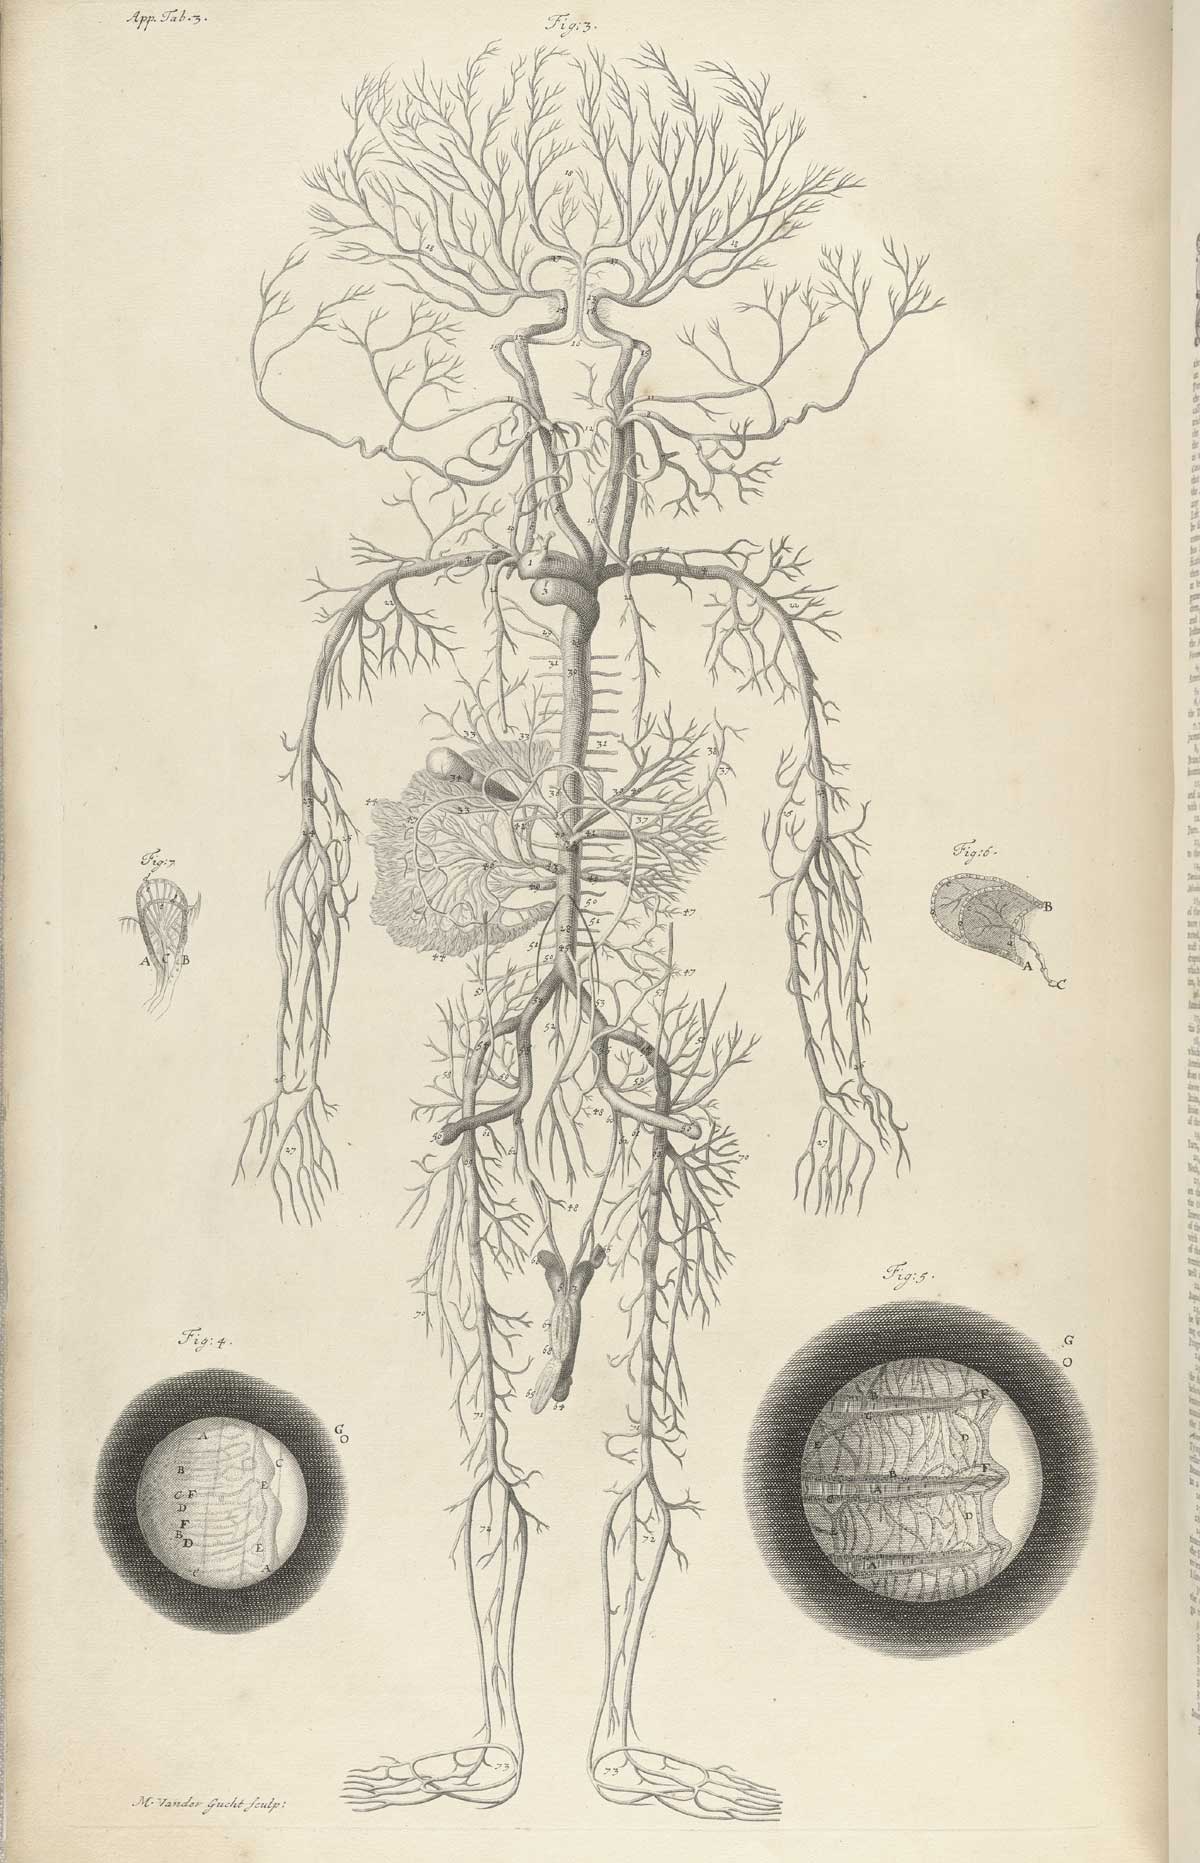 Engraving of a disembodied human vascular system, not including the heart, laid out on a white field, with the head at the top and feet at the bottom, with two detailed close ups in circles to the left and right of the figure, from William Cowper’s Anatomy of the humane bodies, NLM Call no.: WZ 250 C876a 1698.